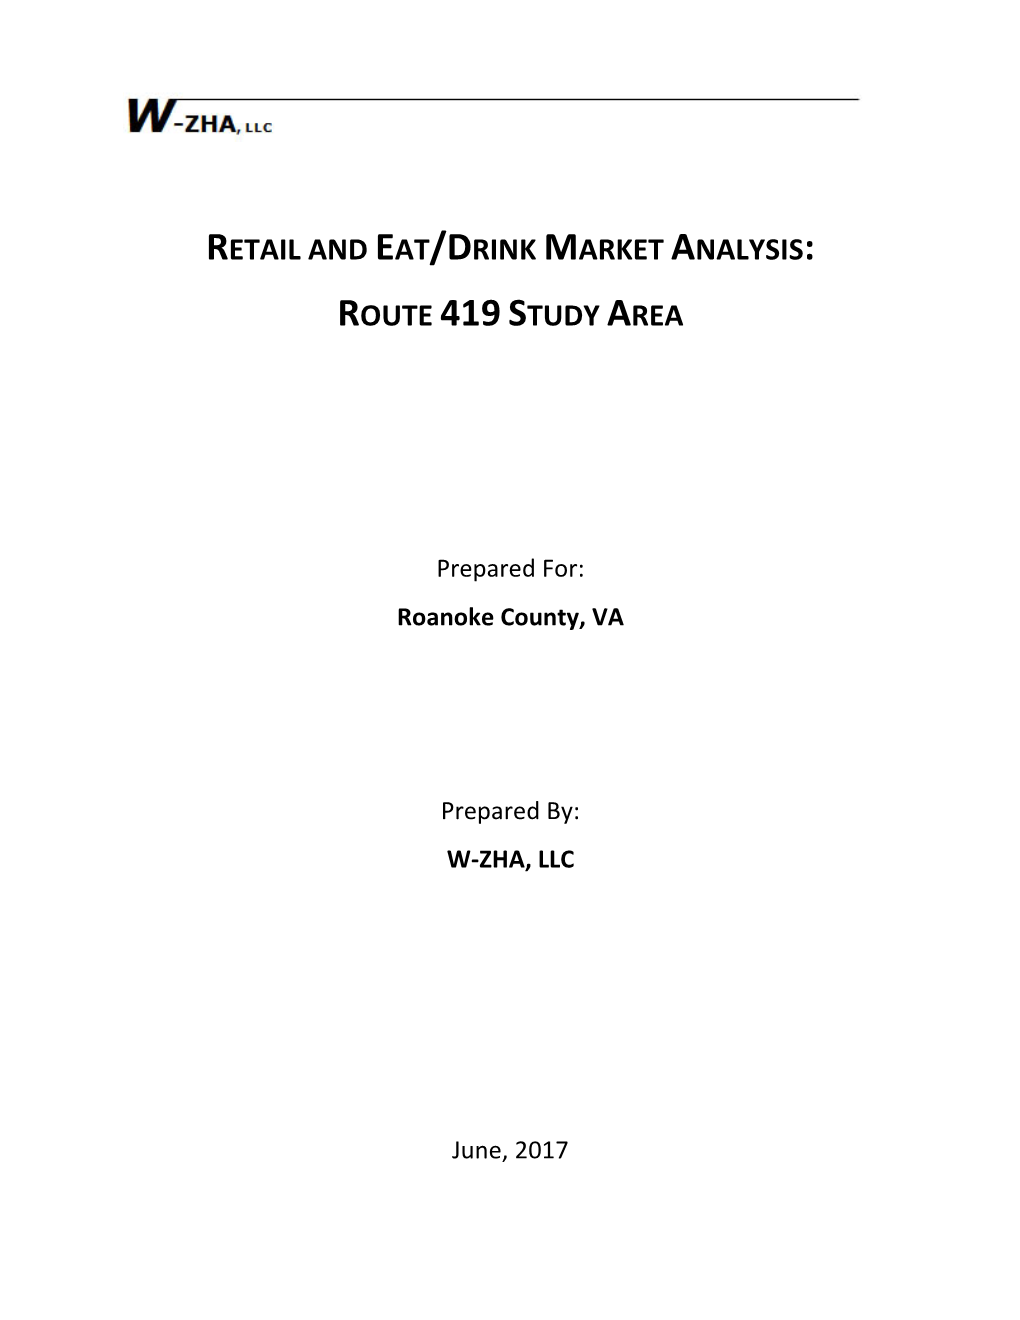 Retail and Eat/Drink Market Analysis: Route 419Study Area